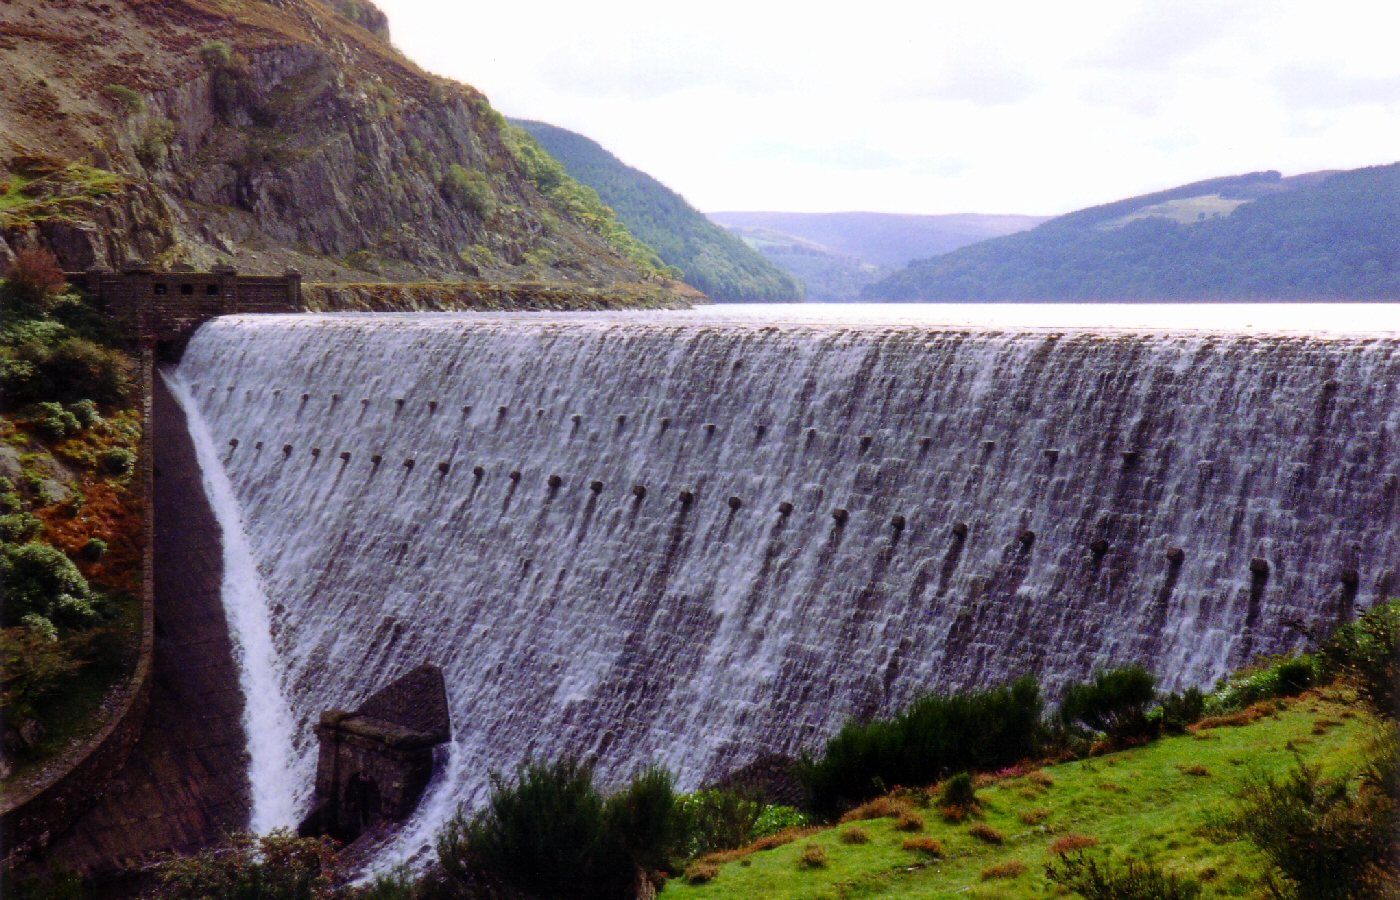 * Classic Cymru - Elan Valley - Caban Coch, the lowest of the dams, is full and overflowing during the same summer of 1992 (by AJW) *